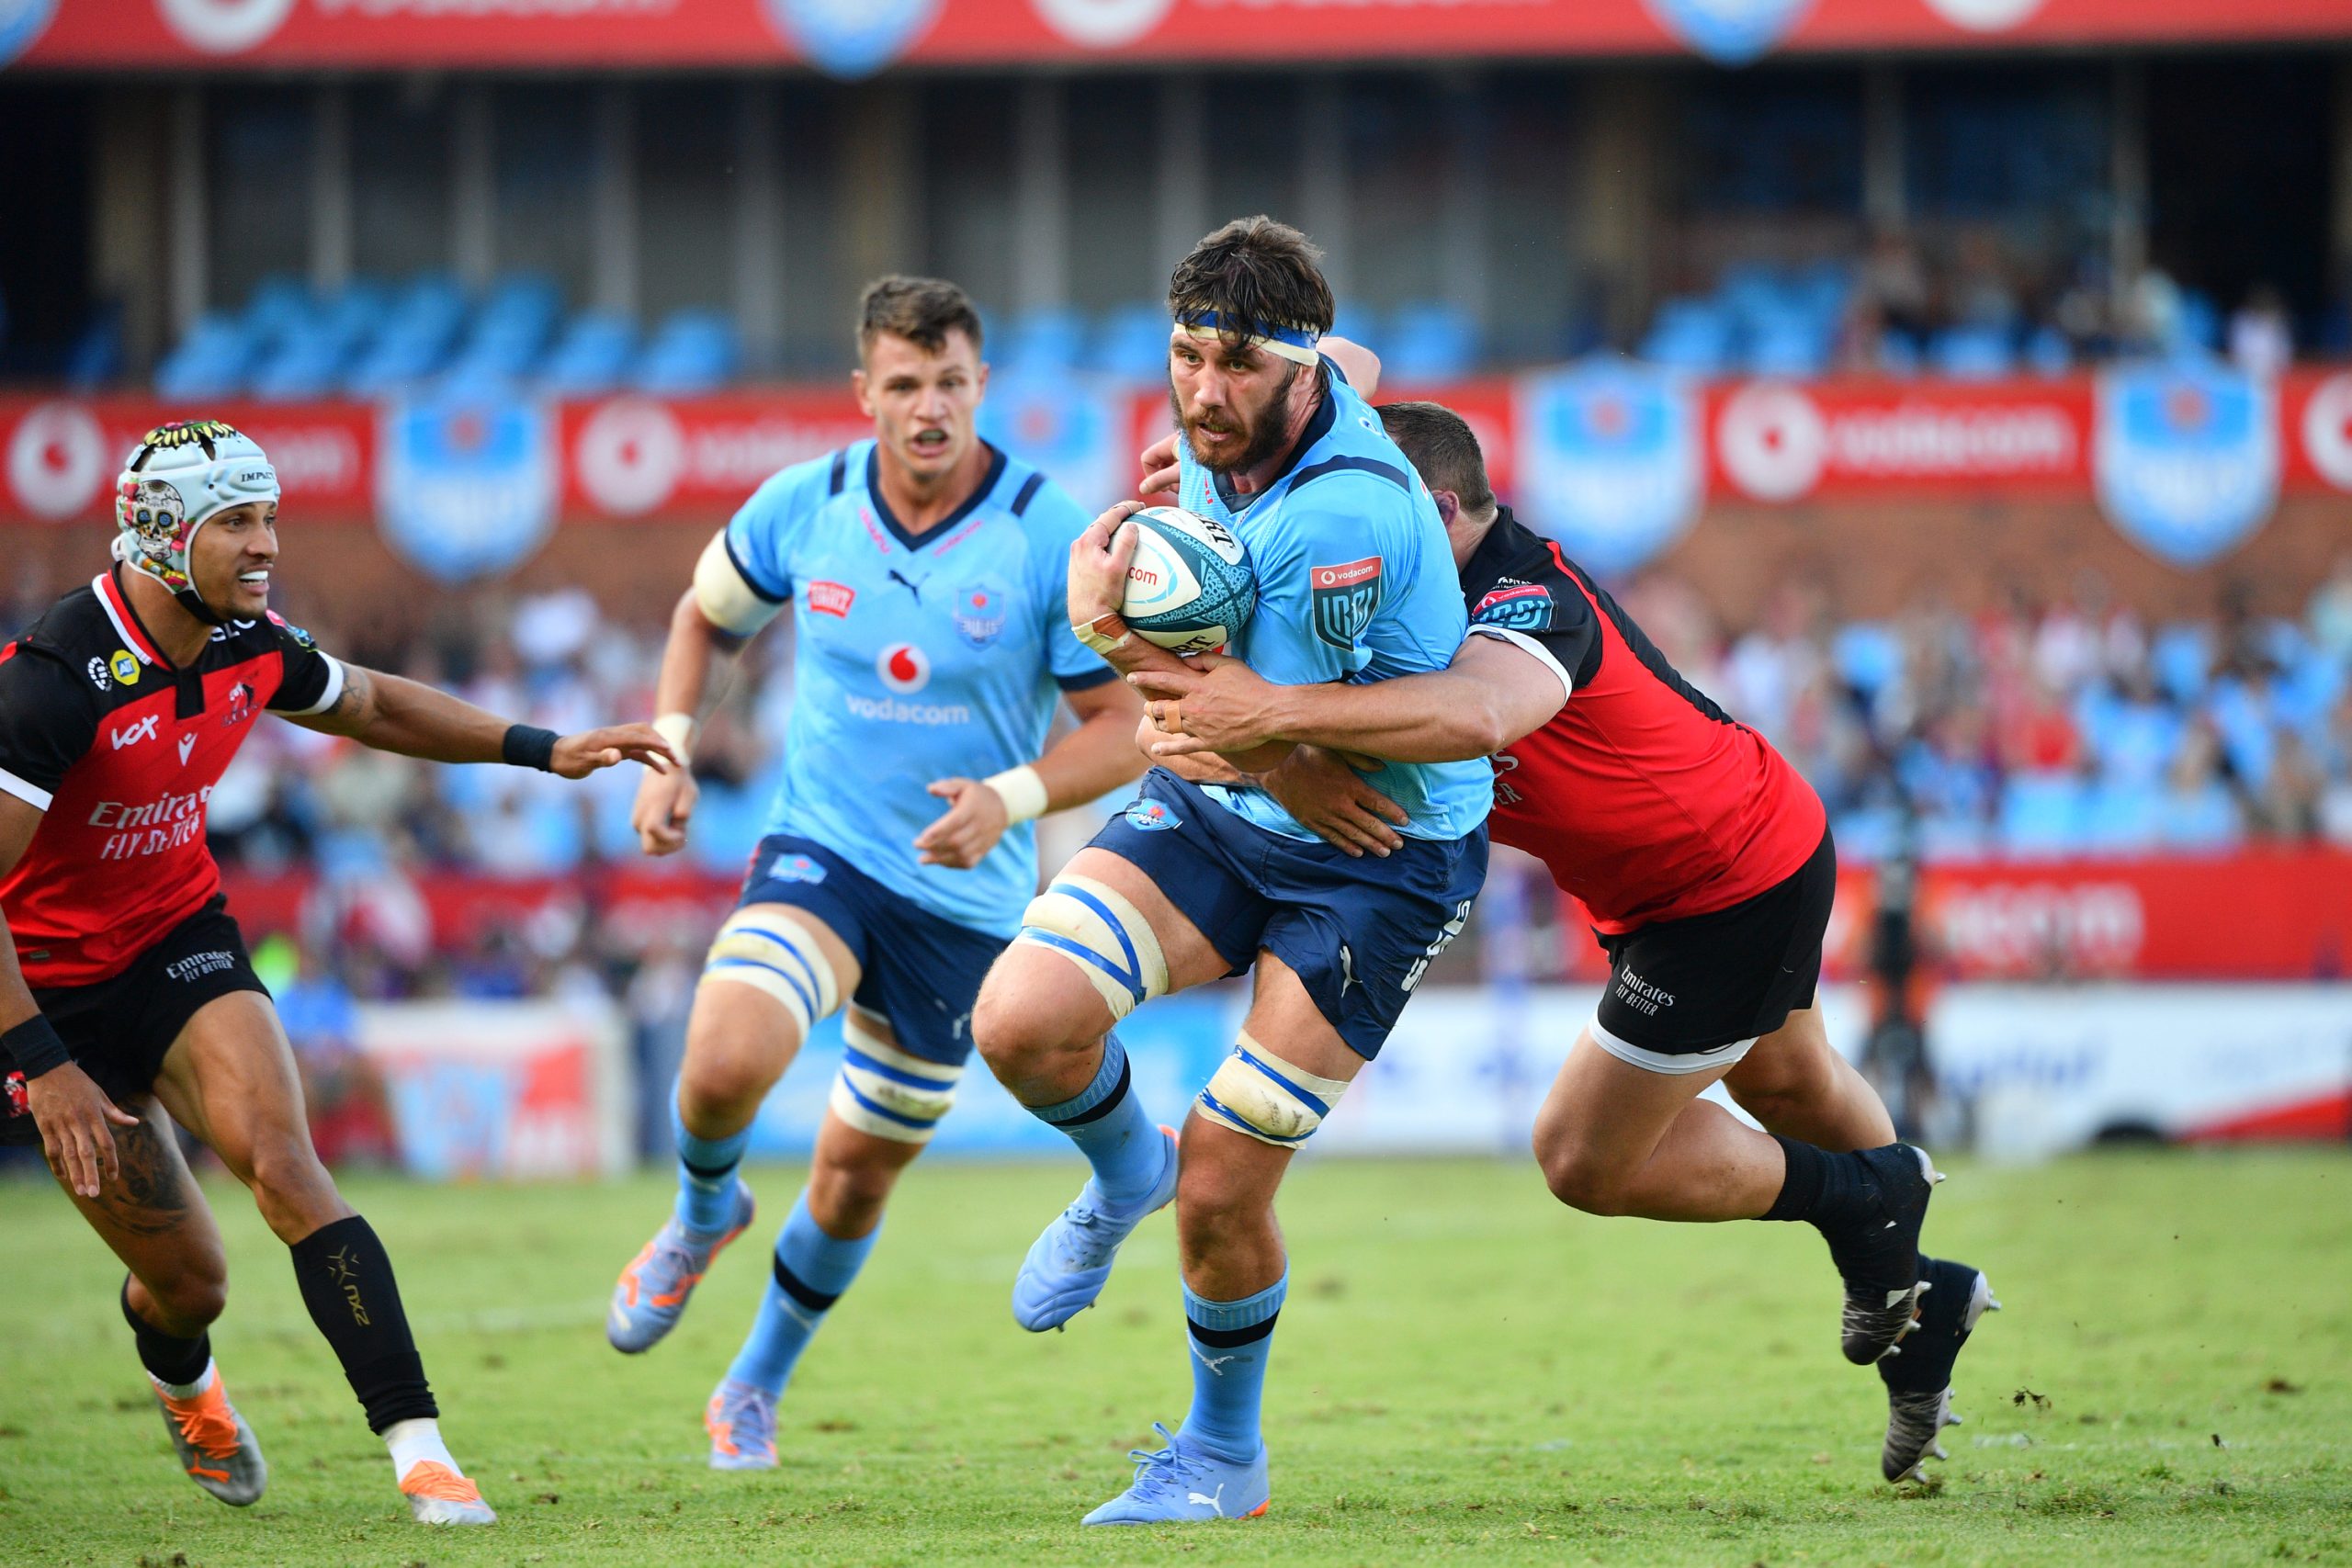 Jukskei rivals cling on for rare win